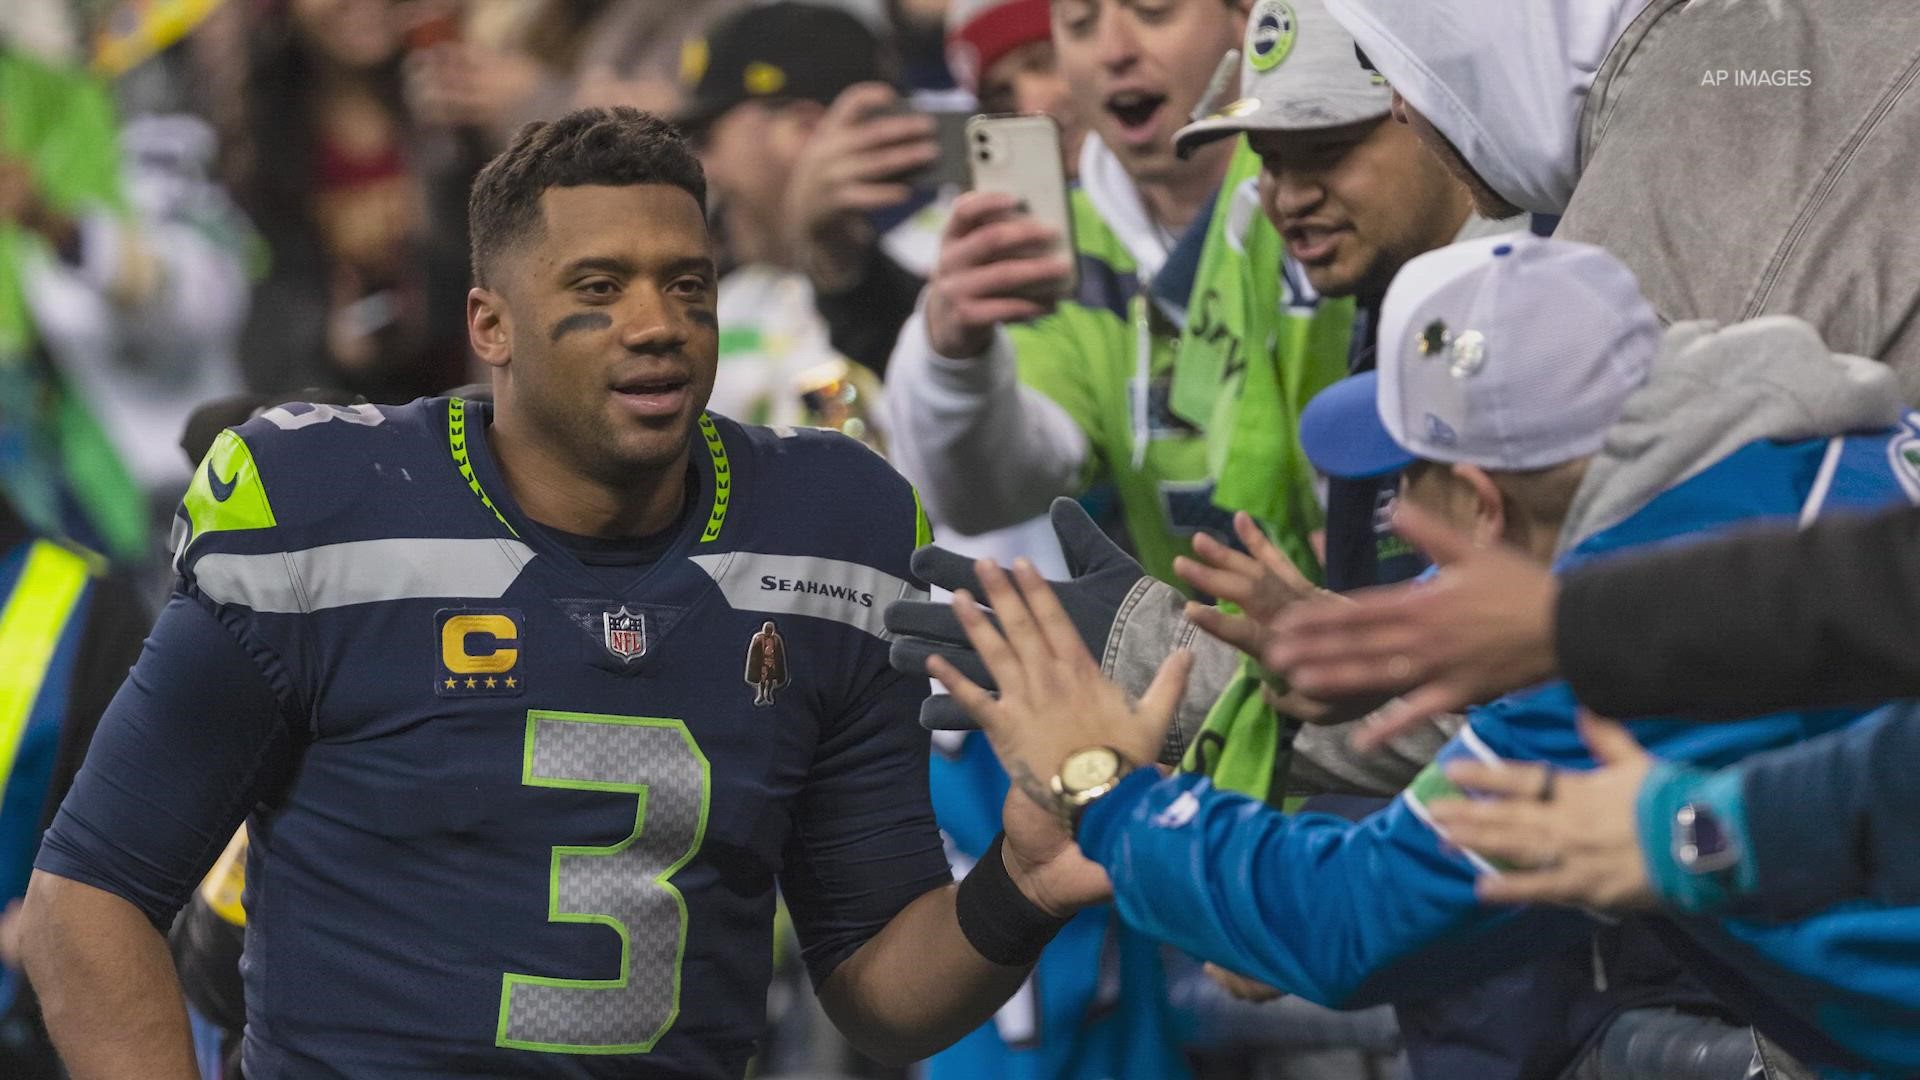 Russell Wilson Nominated For 2020 Walter Payton NFL Man Of The